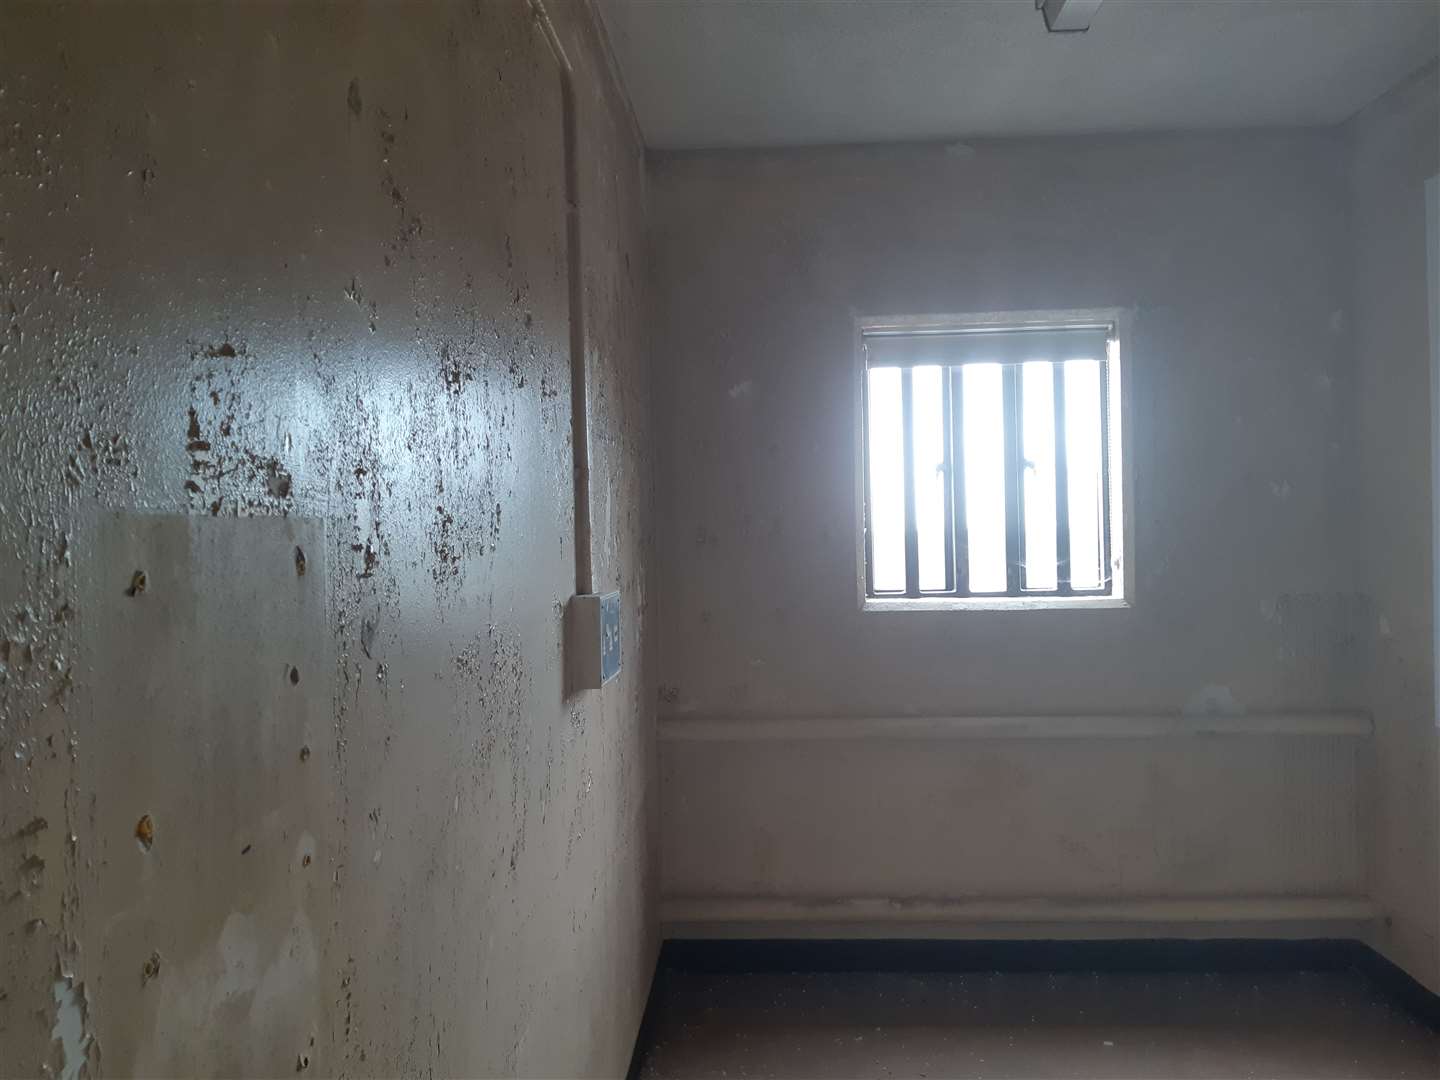 One of the cells at Rye House. Picture: Sam Lennon KMG